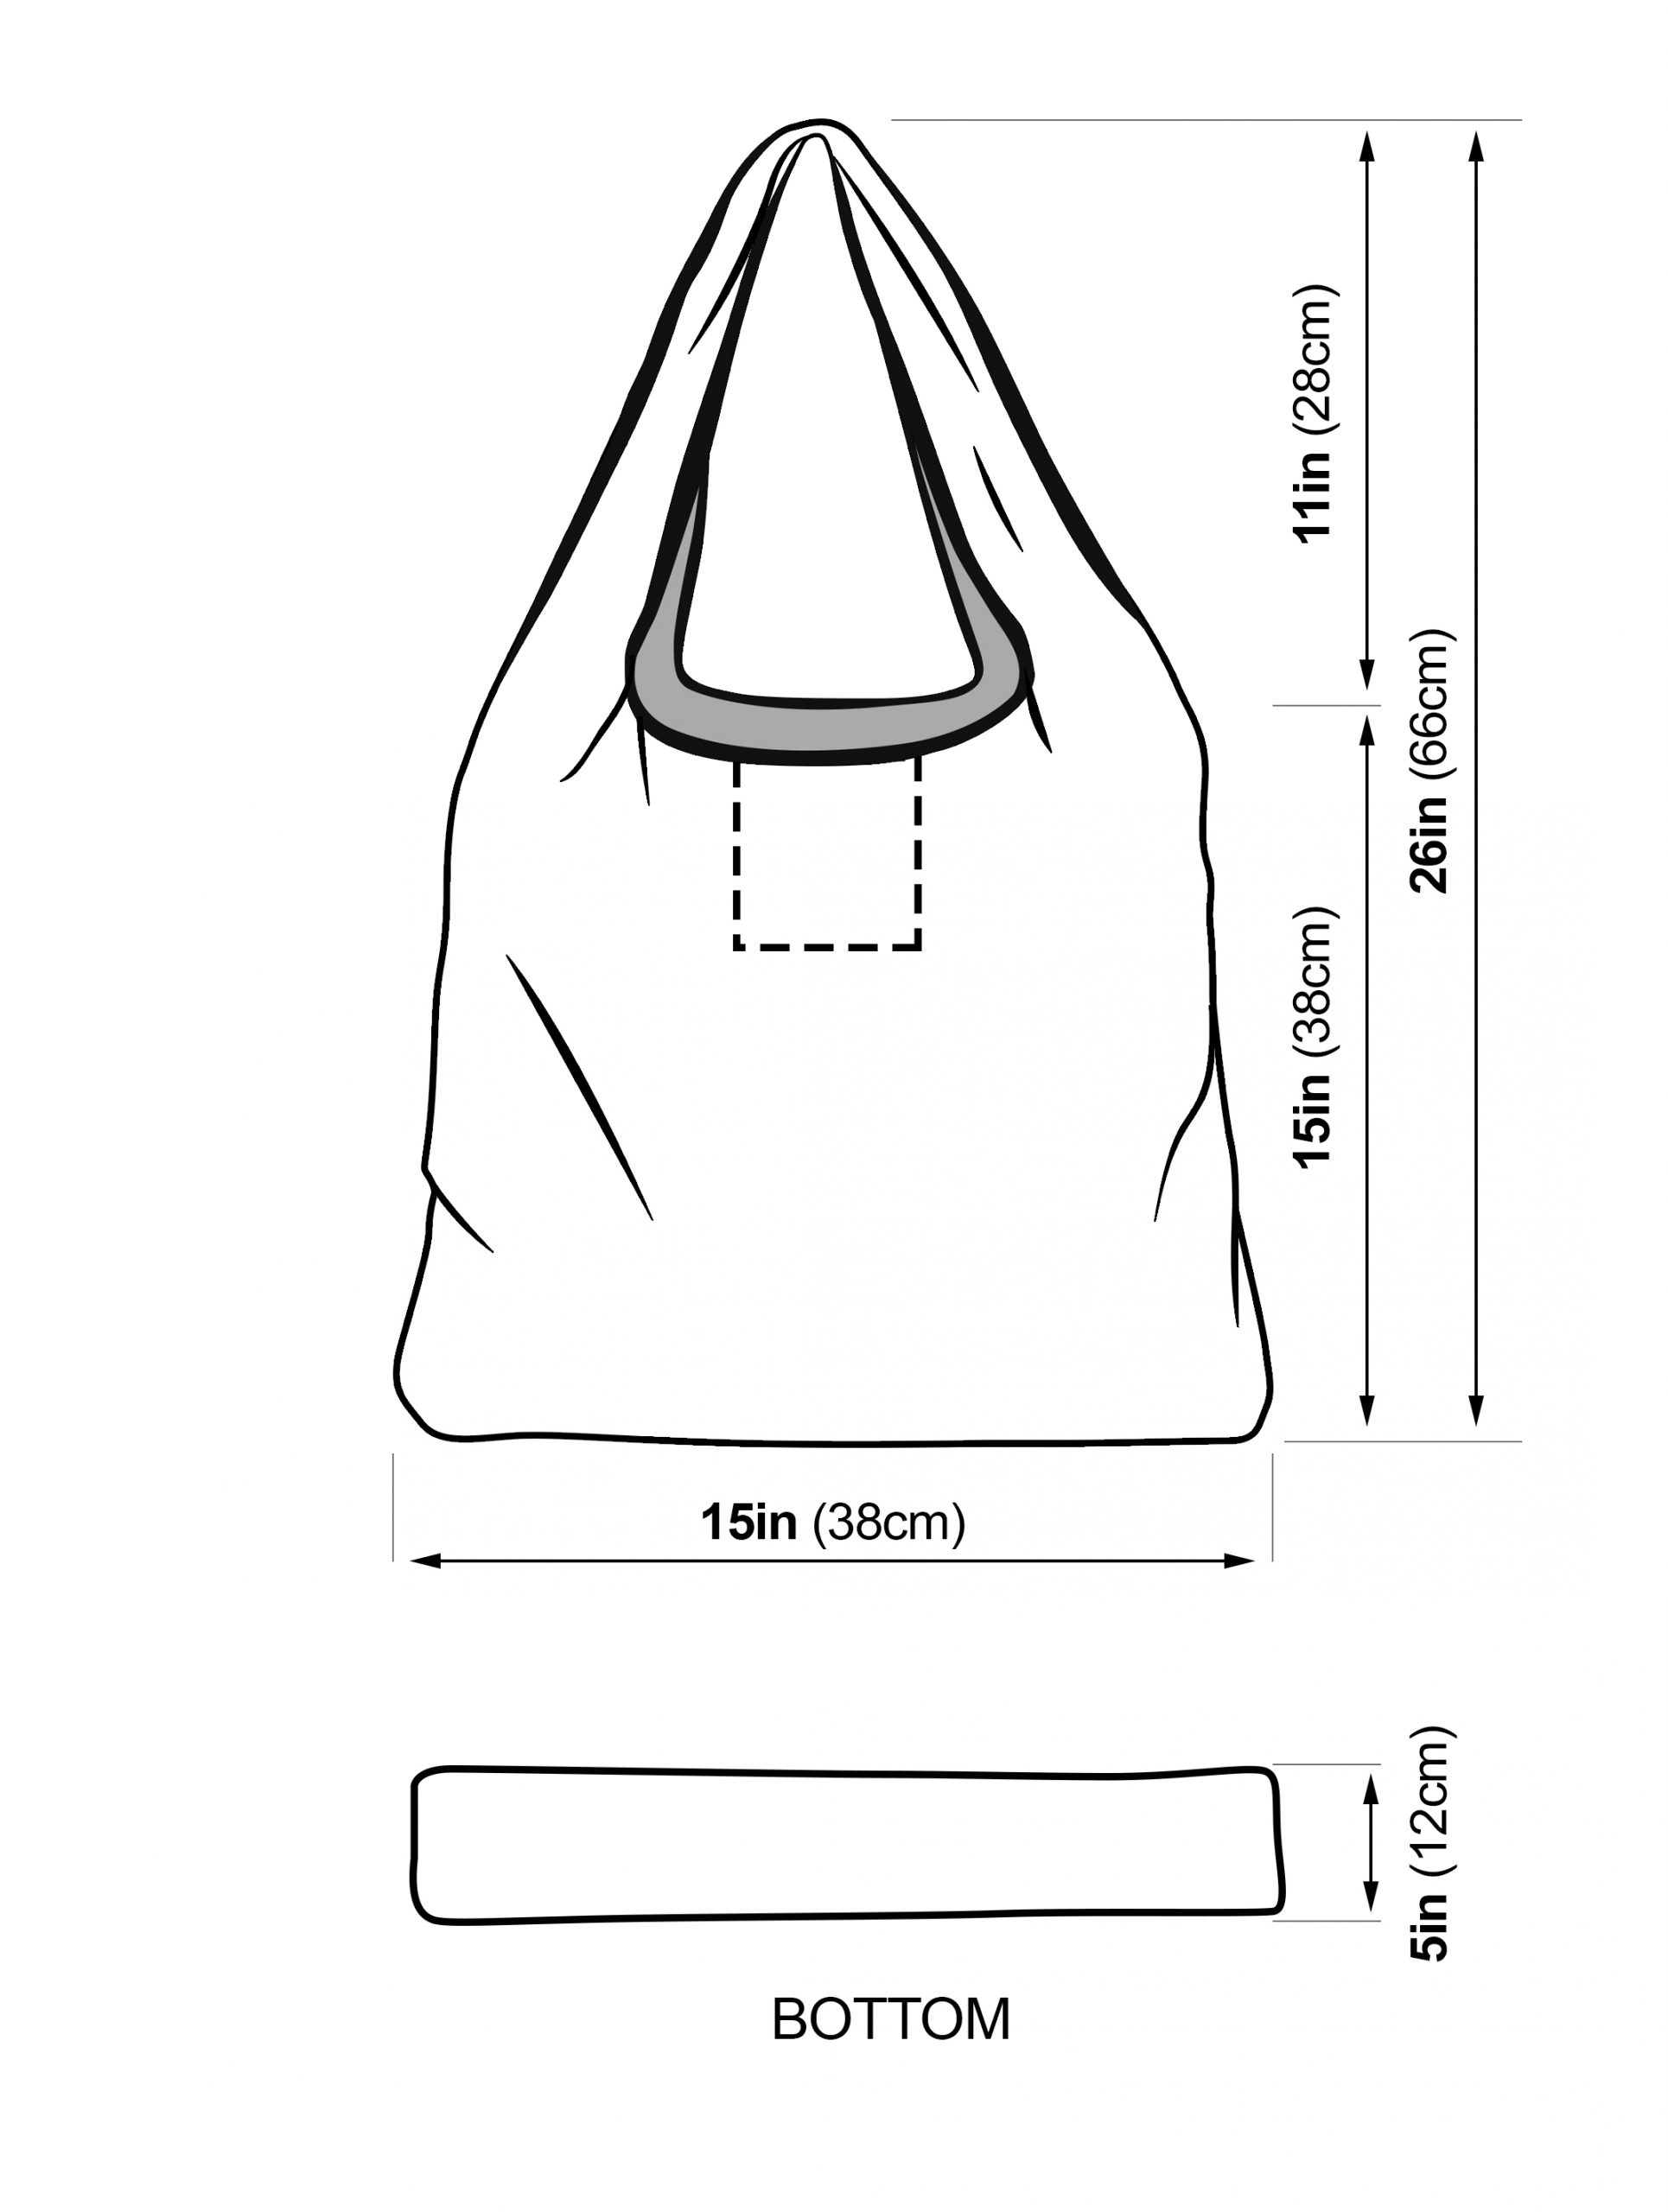 grocery bag dimensions